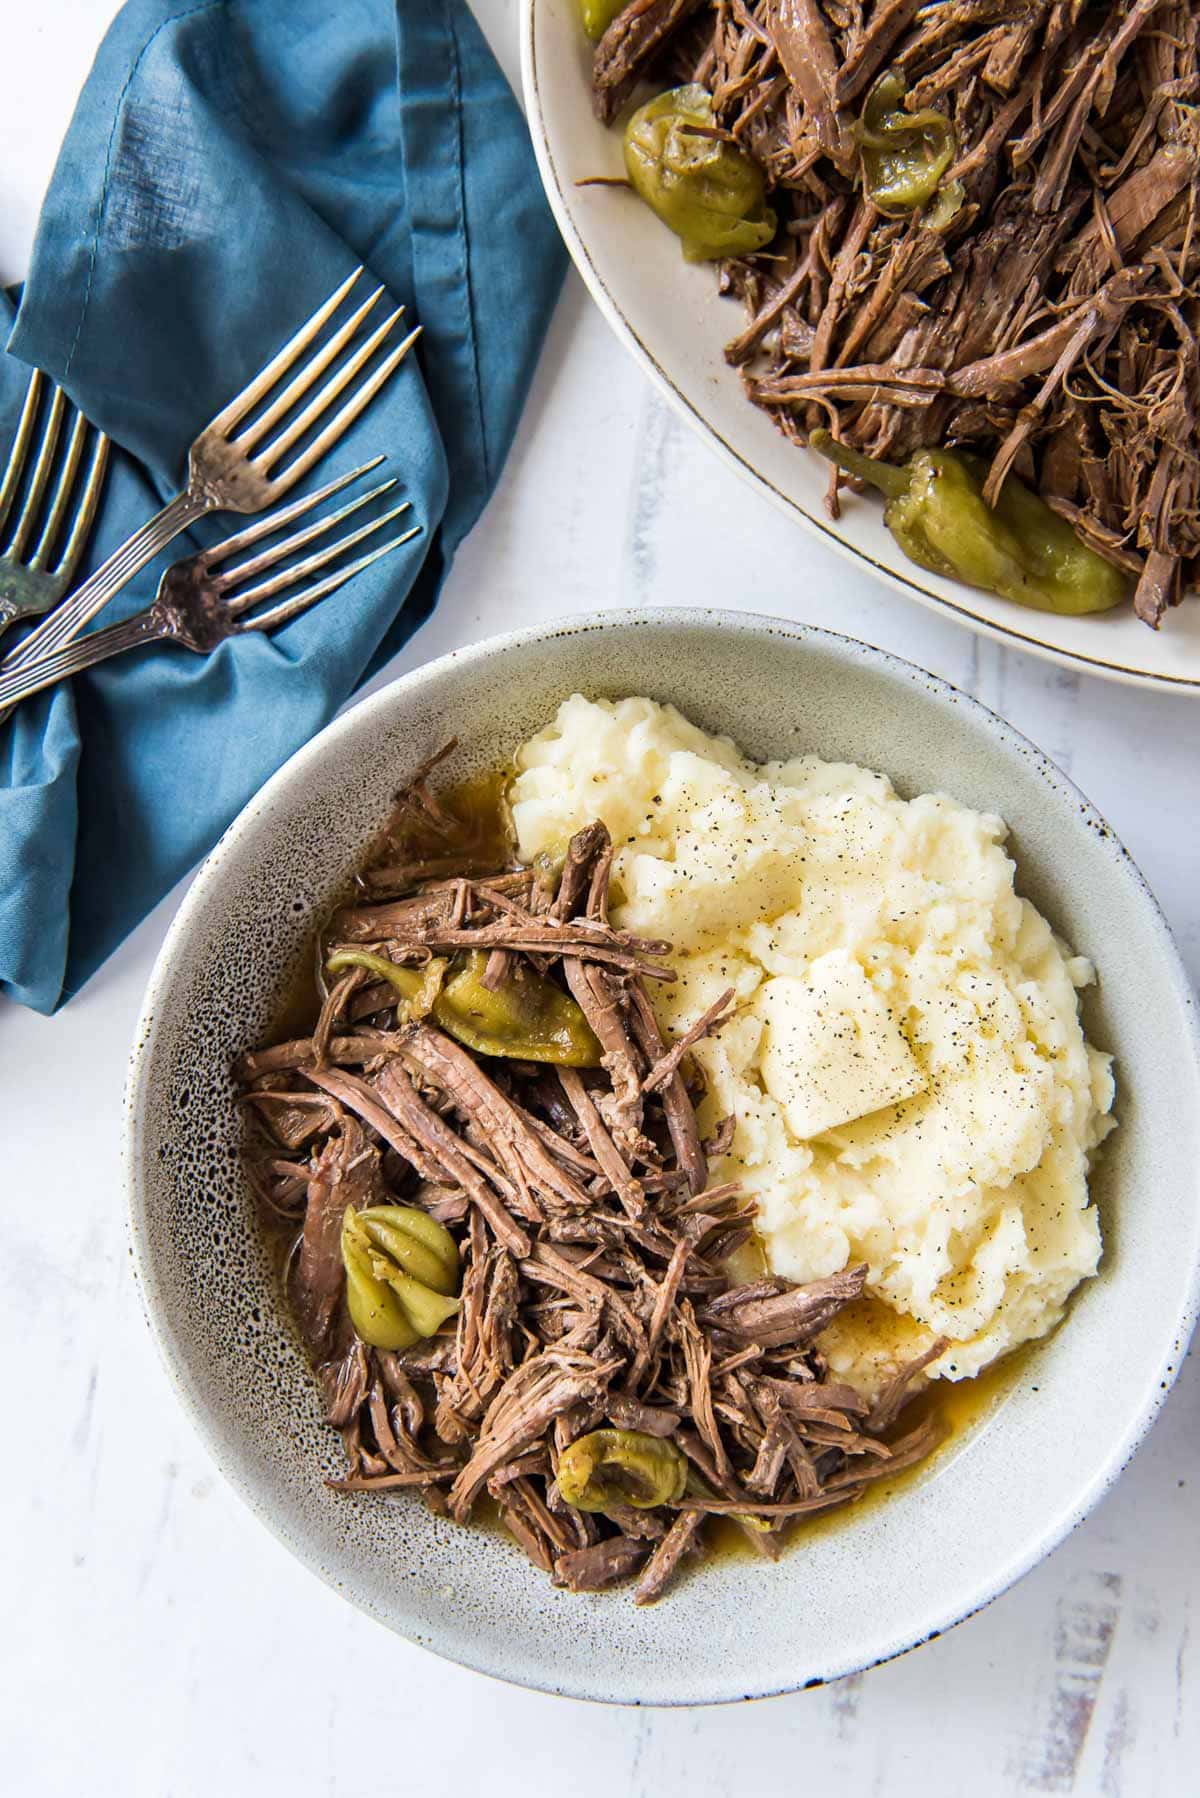 https://www.yellowblissroad.com/wp-content/uploads/2020/08/Slow-Cooker-Spicy-Top-Round-Roast-5.jpg